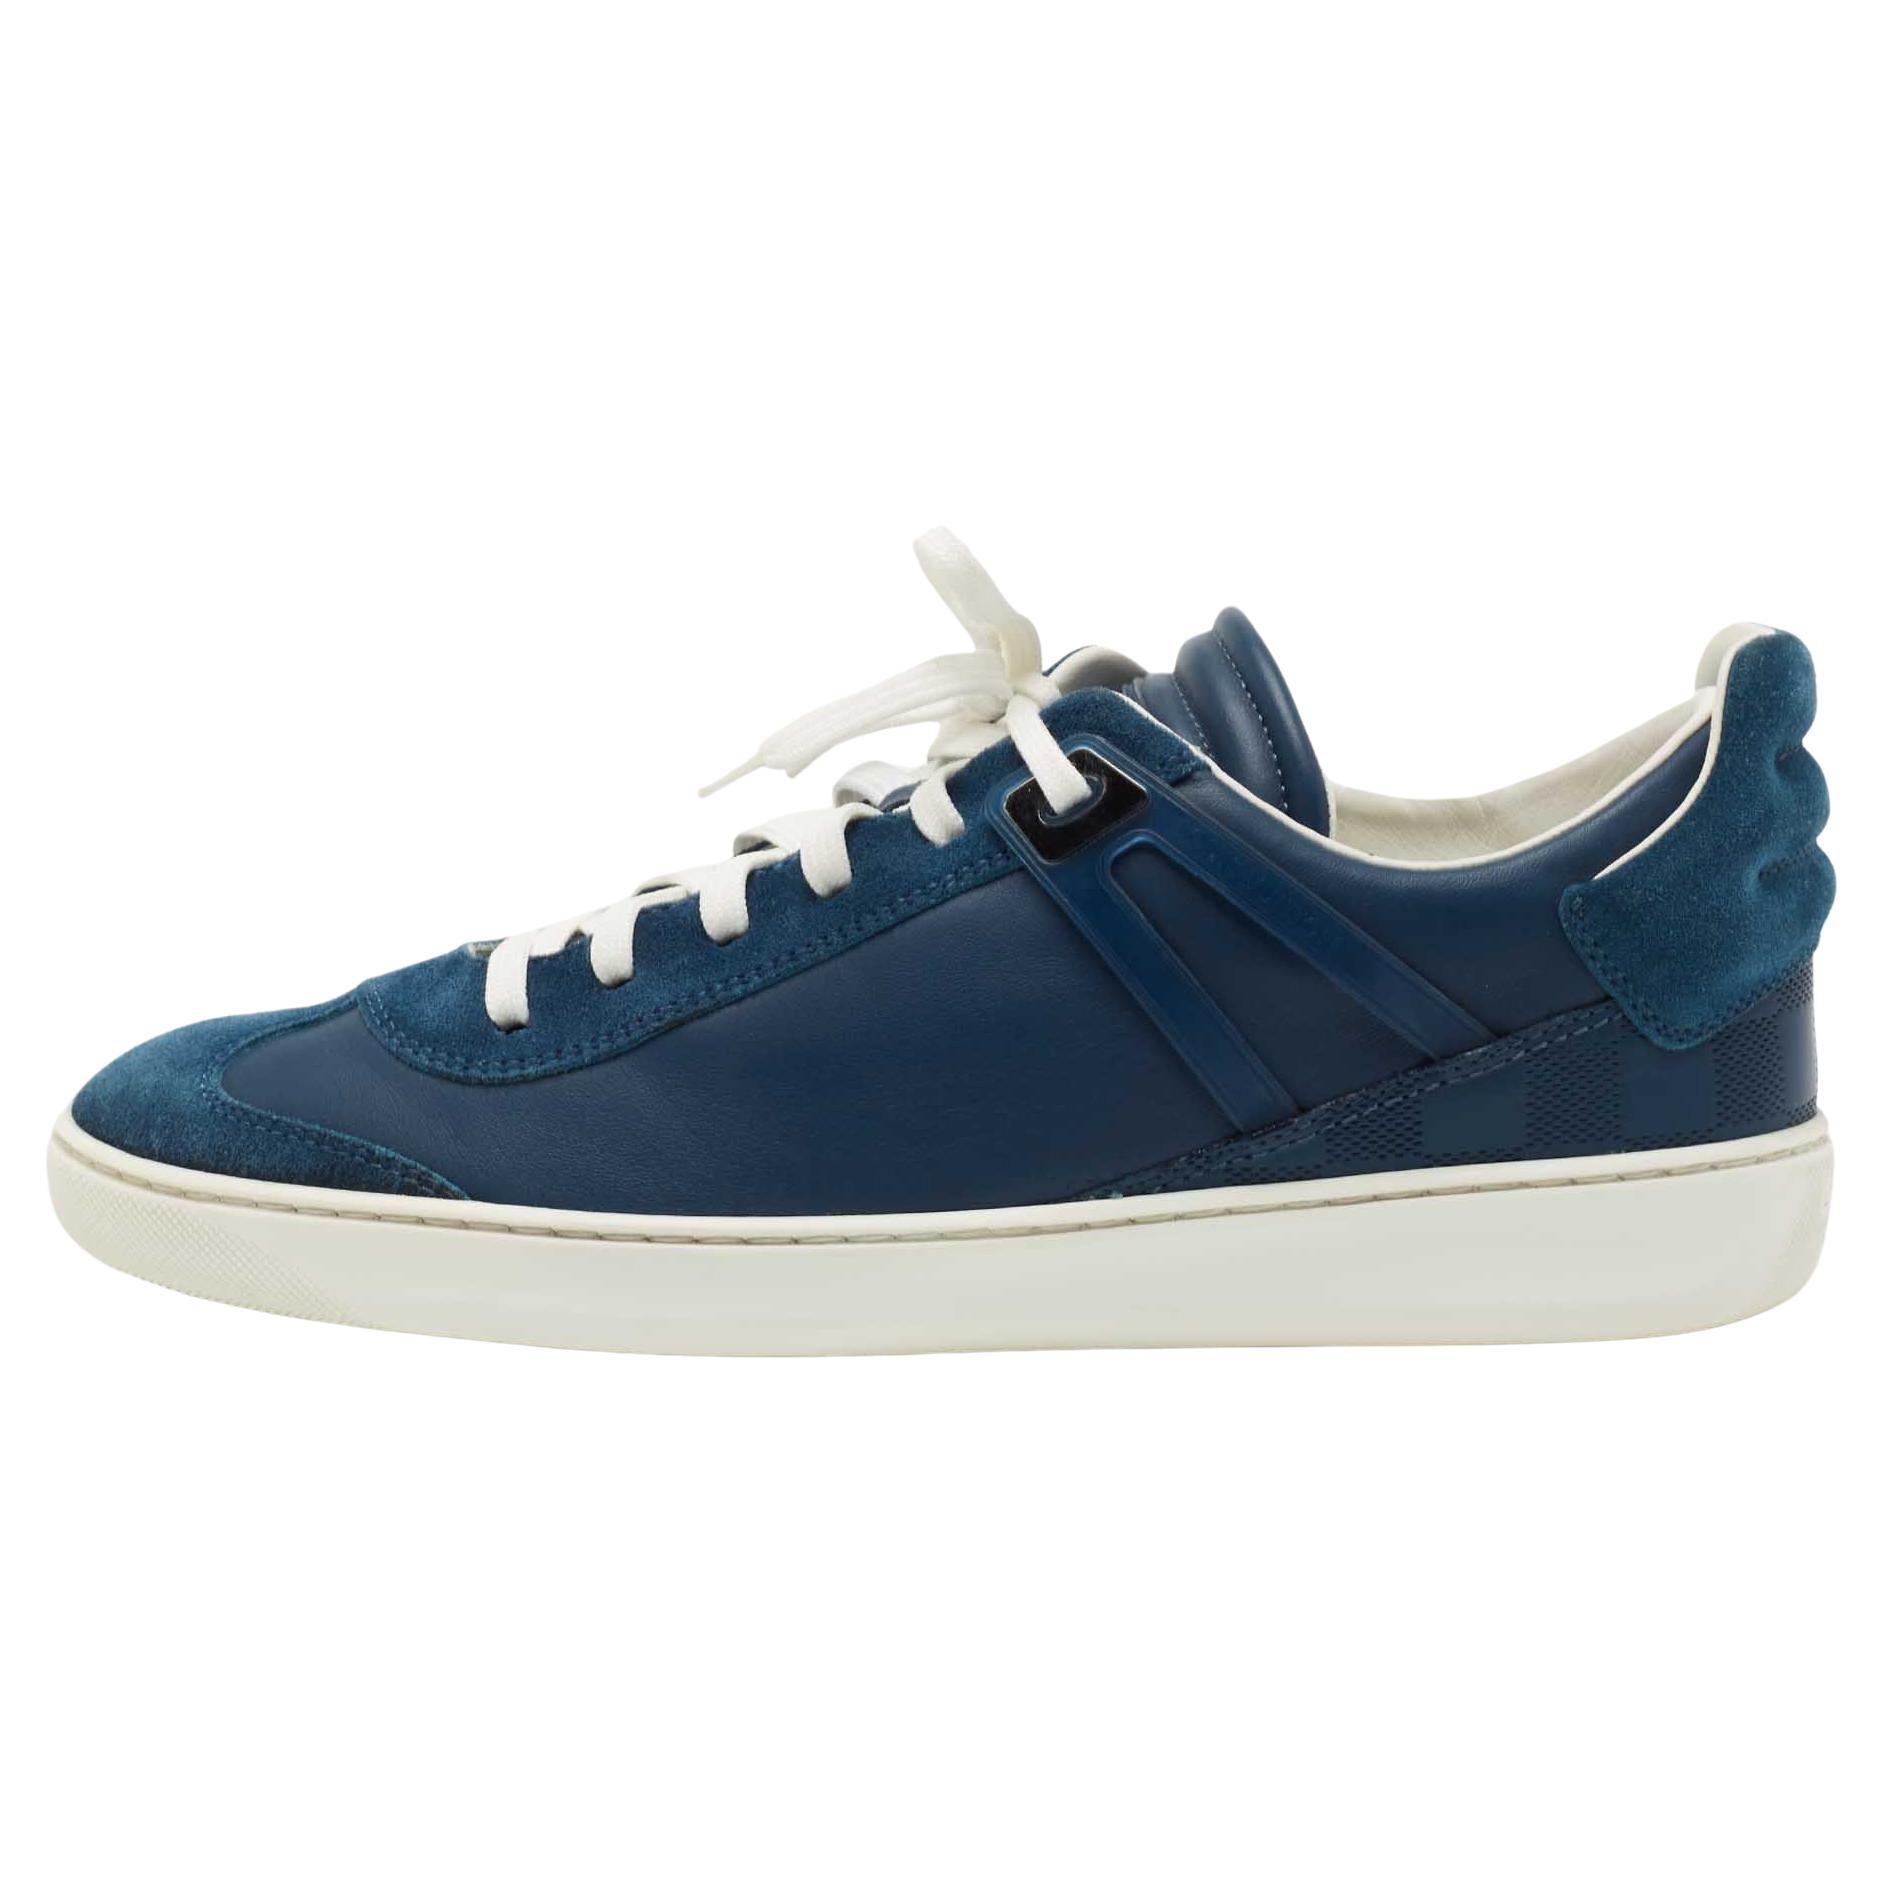 Louis Vuitton Blue Leather and Suede Low Top Sneakers Size 40.5 For Sale